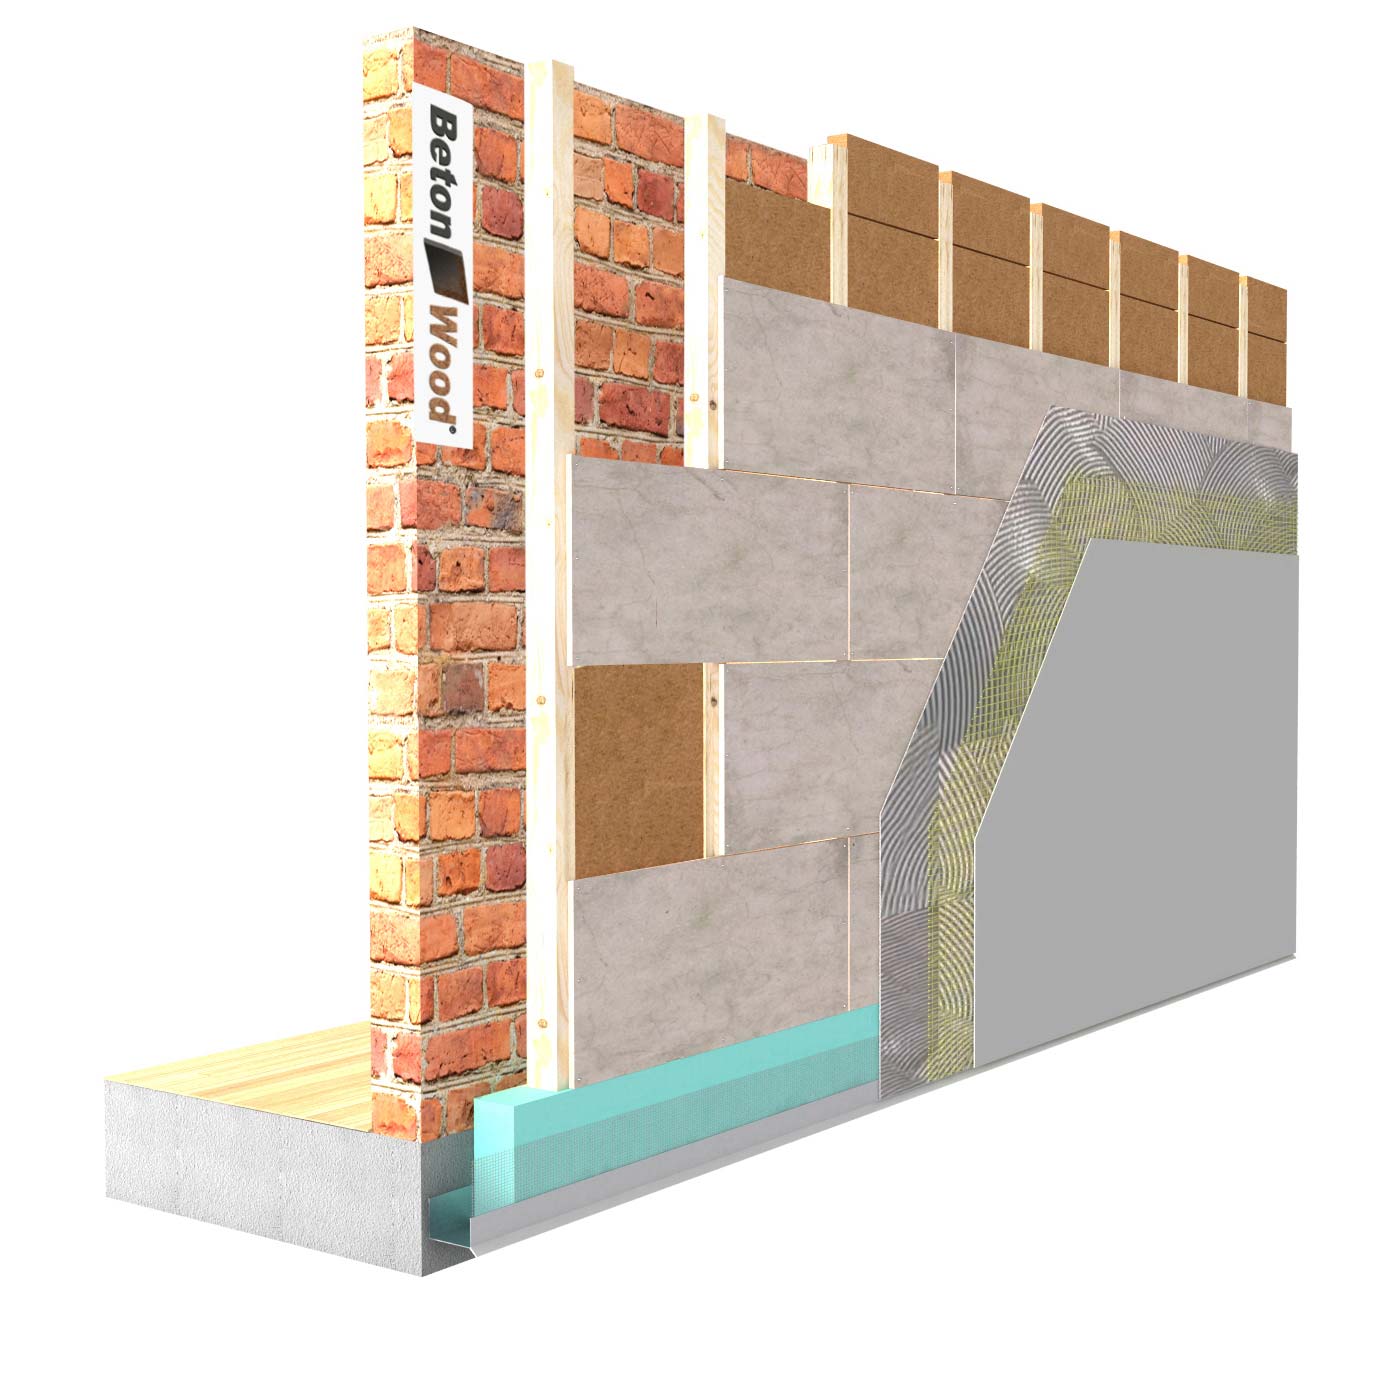 External insulation system with Therm SD wood fiber on masonry